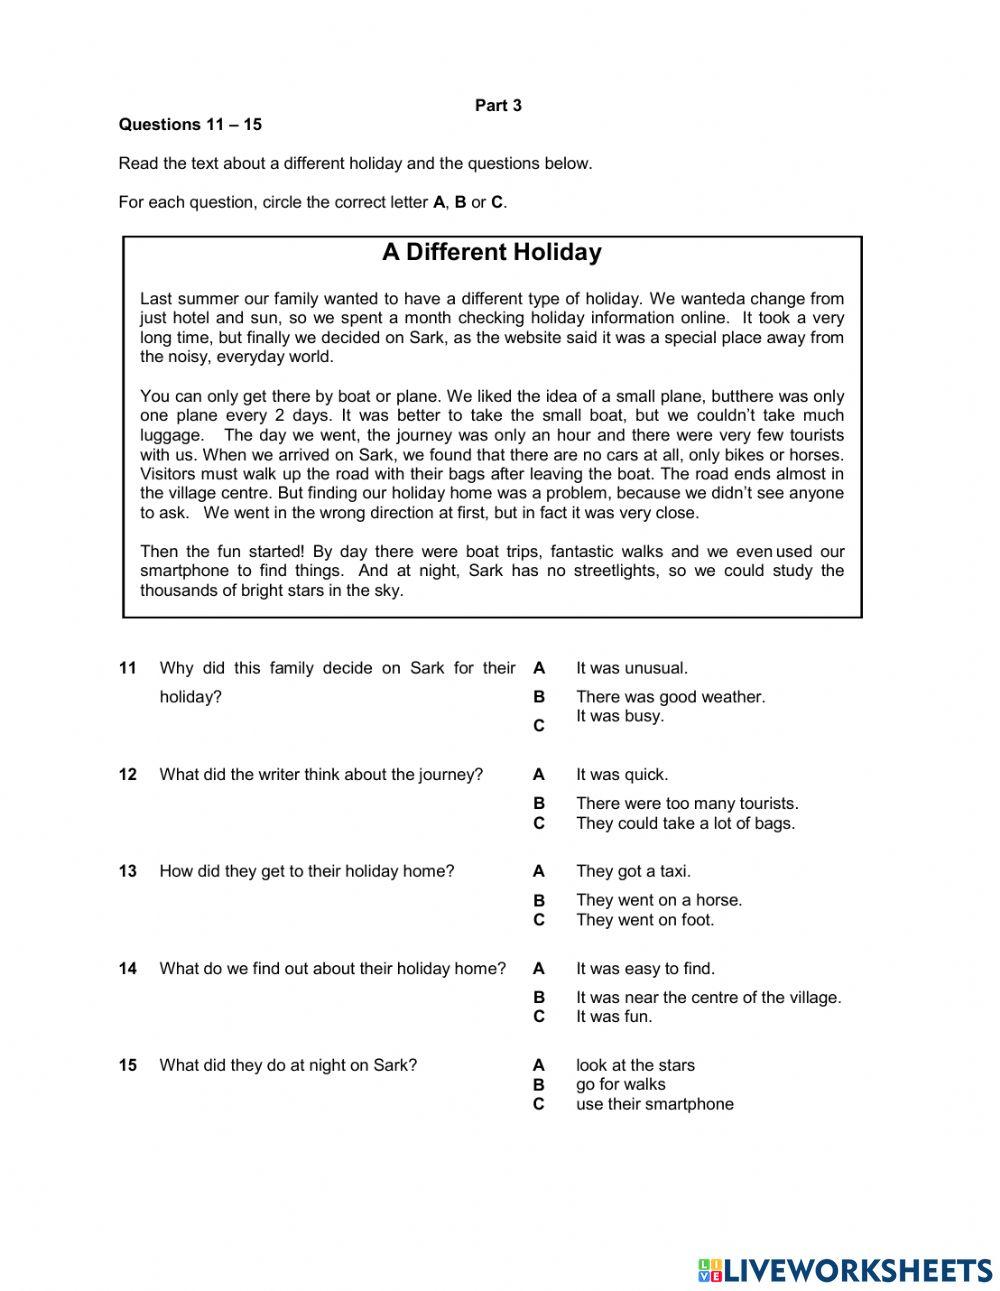 CAMBRIDGE ENGLISH EMPOWER A2 READING - USE OF ENGLISH COMPETENCY TEST  Mid-Course Test online exercise for | Live Worksheets